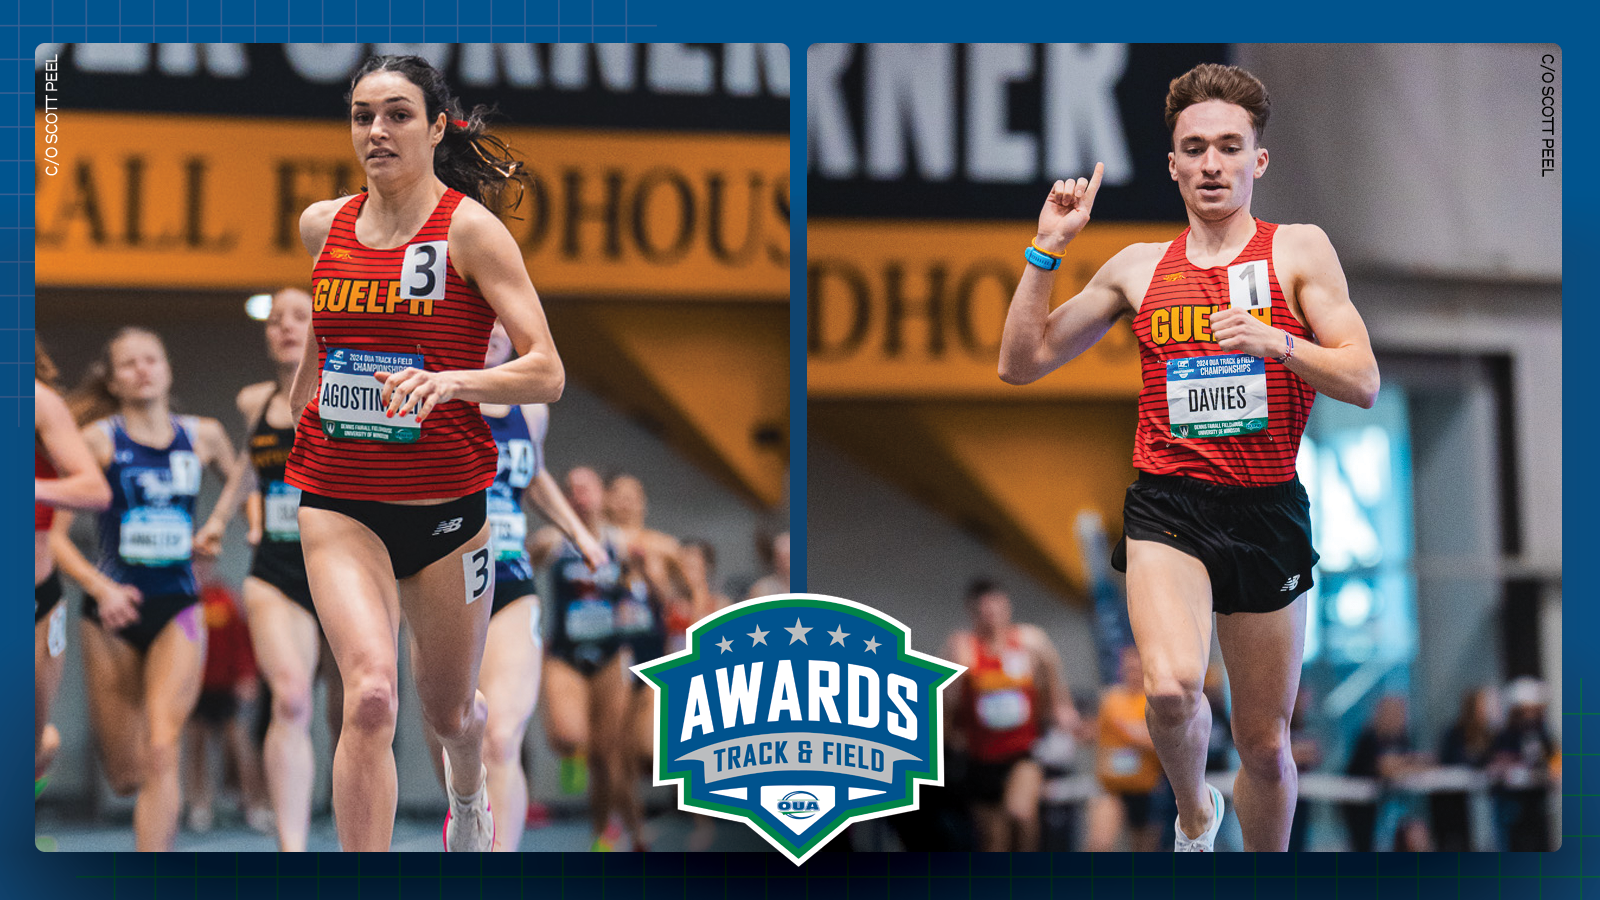 Graphic on blue background featuring action photos of Guelph track & field athletes Julia Agostinelli and Max Davies, with the OUA Track & Field Awards logo centered in the lower third